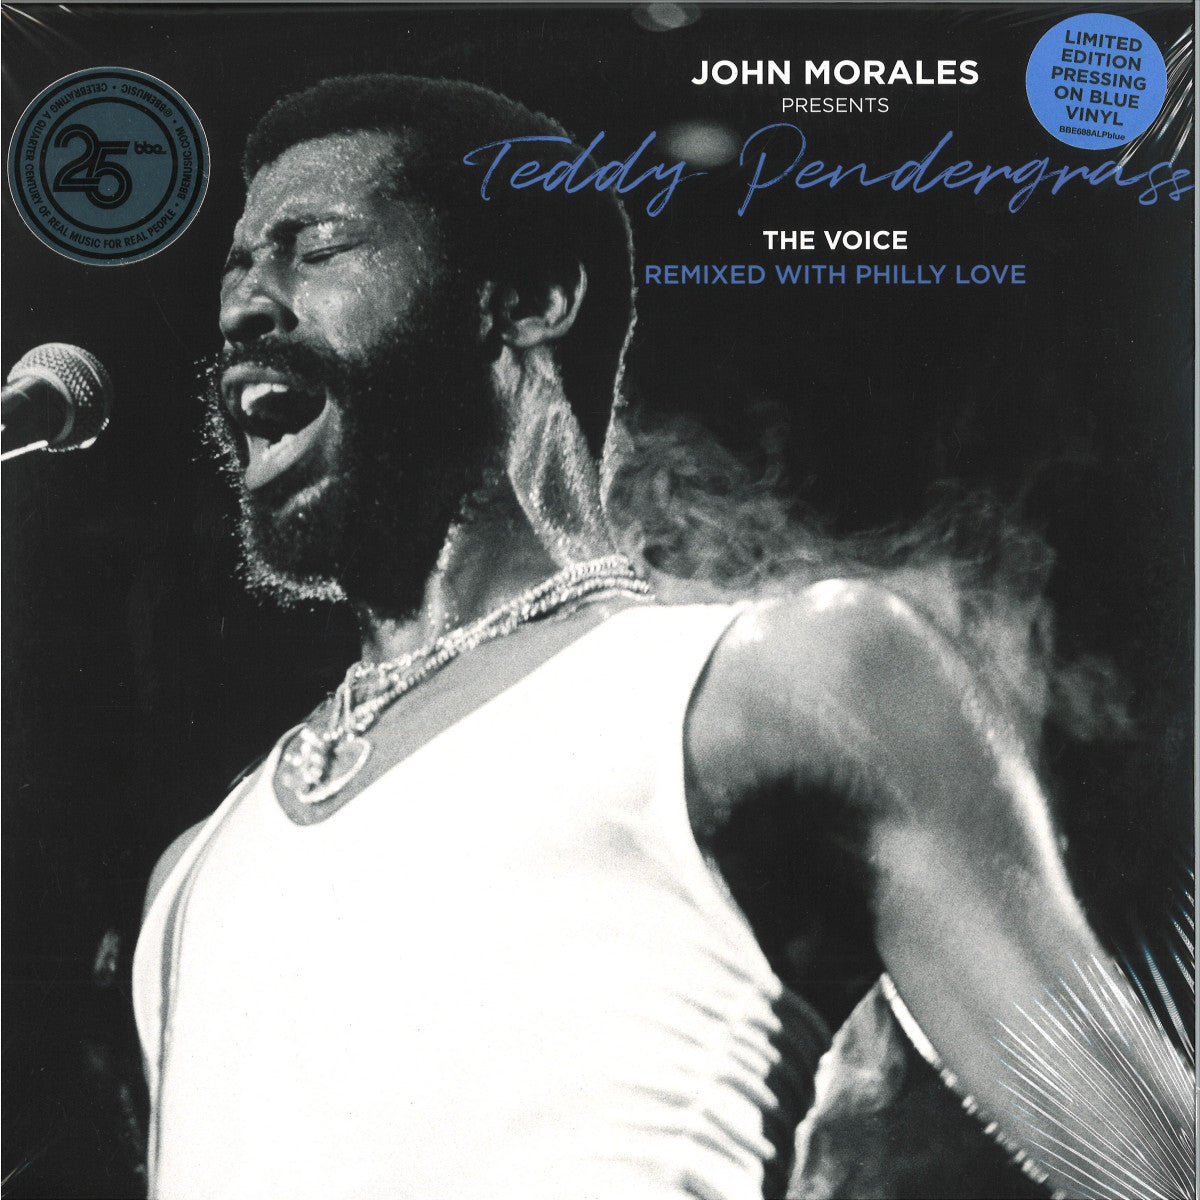 John Morales Presents Teddy Pendergrass - The Voice (Remixed With Philly Love)